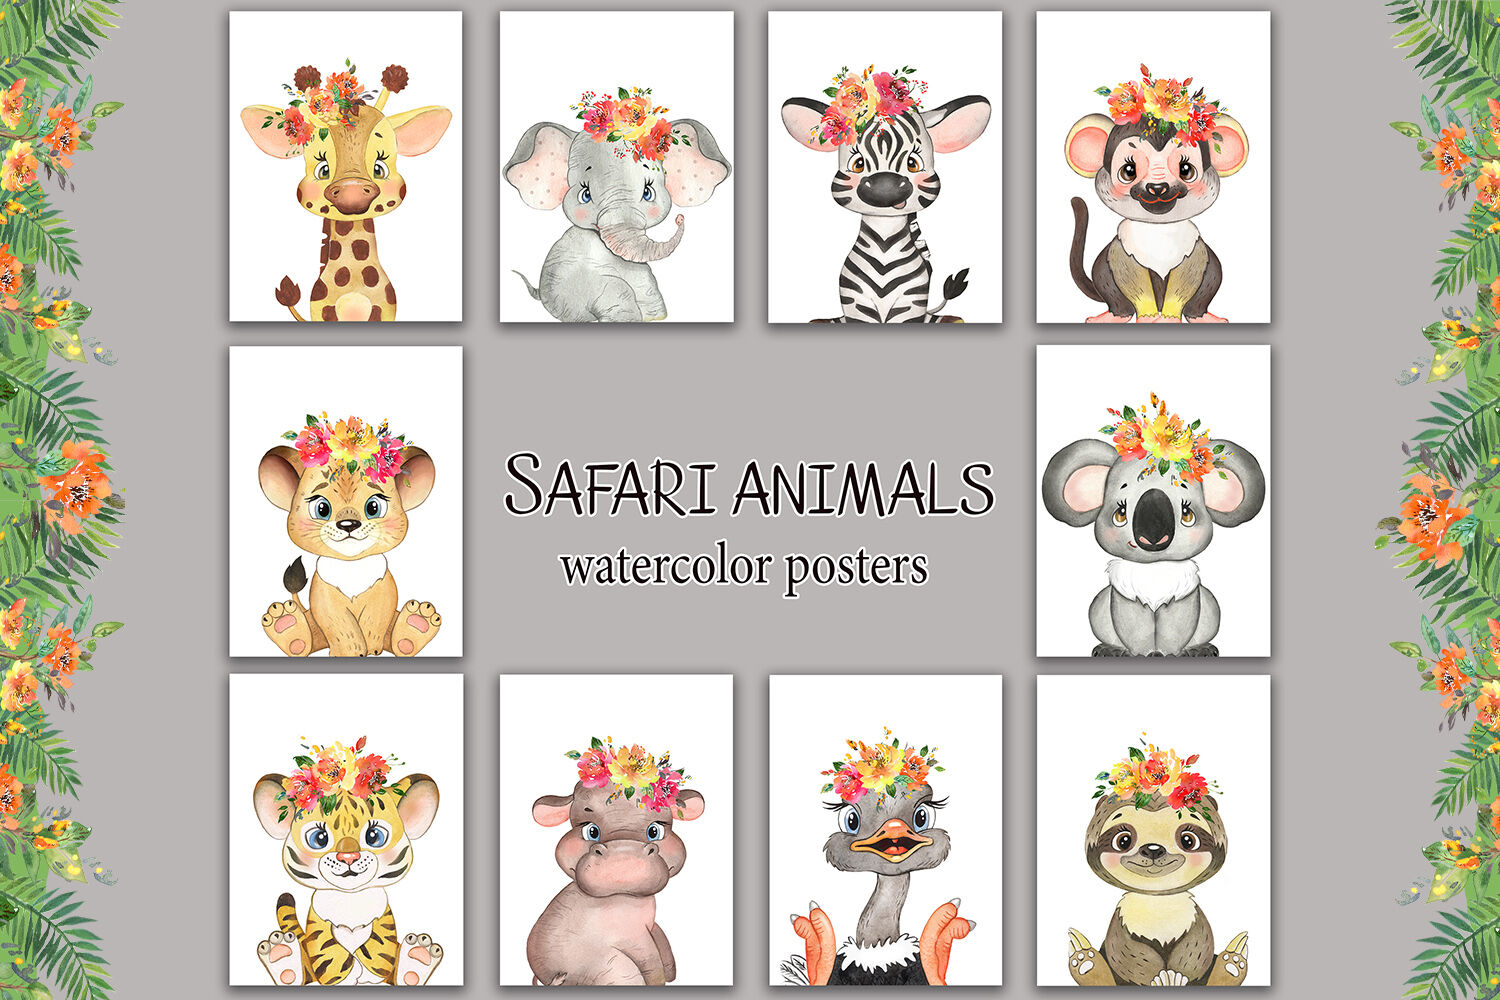 baby animals pictures for kids